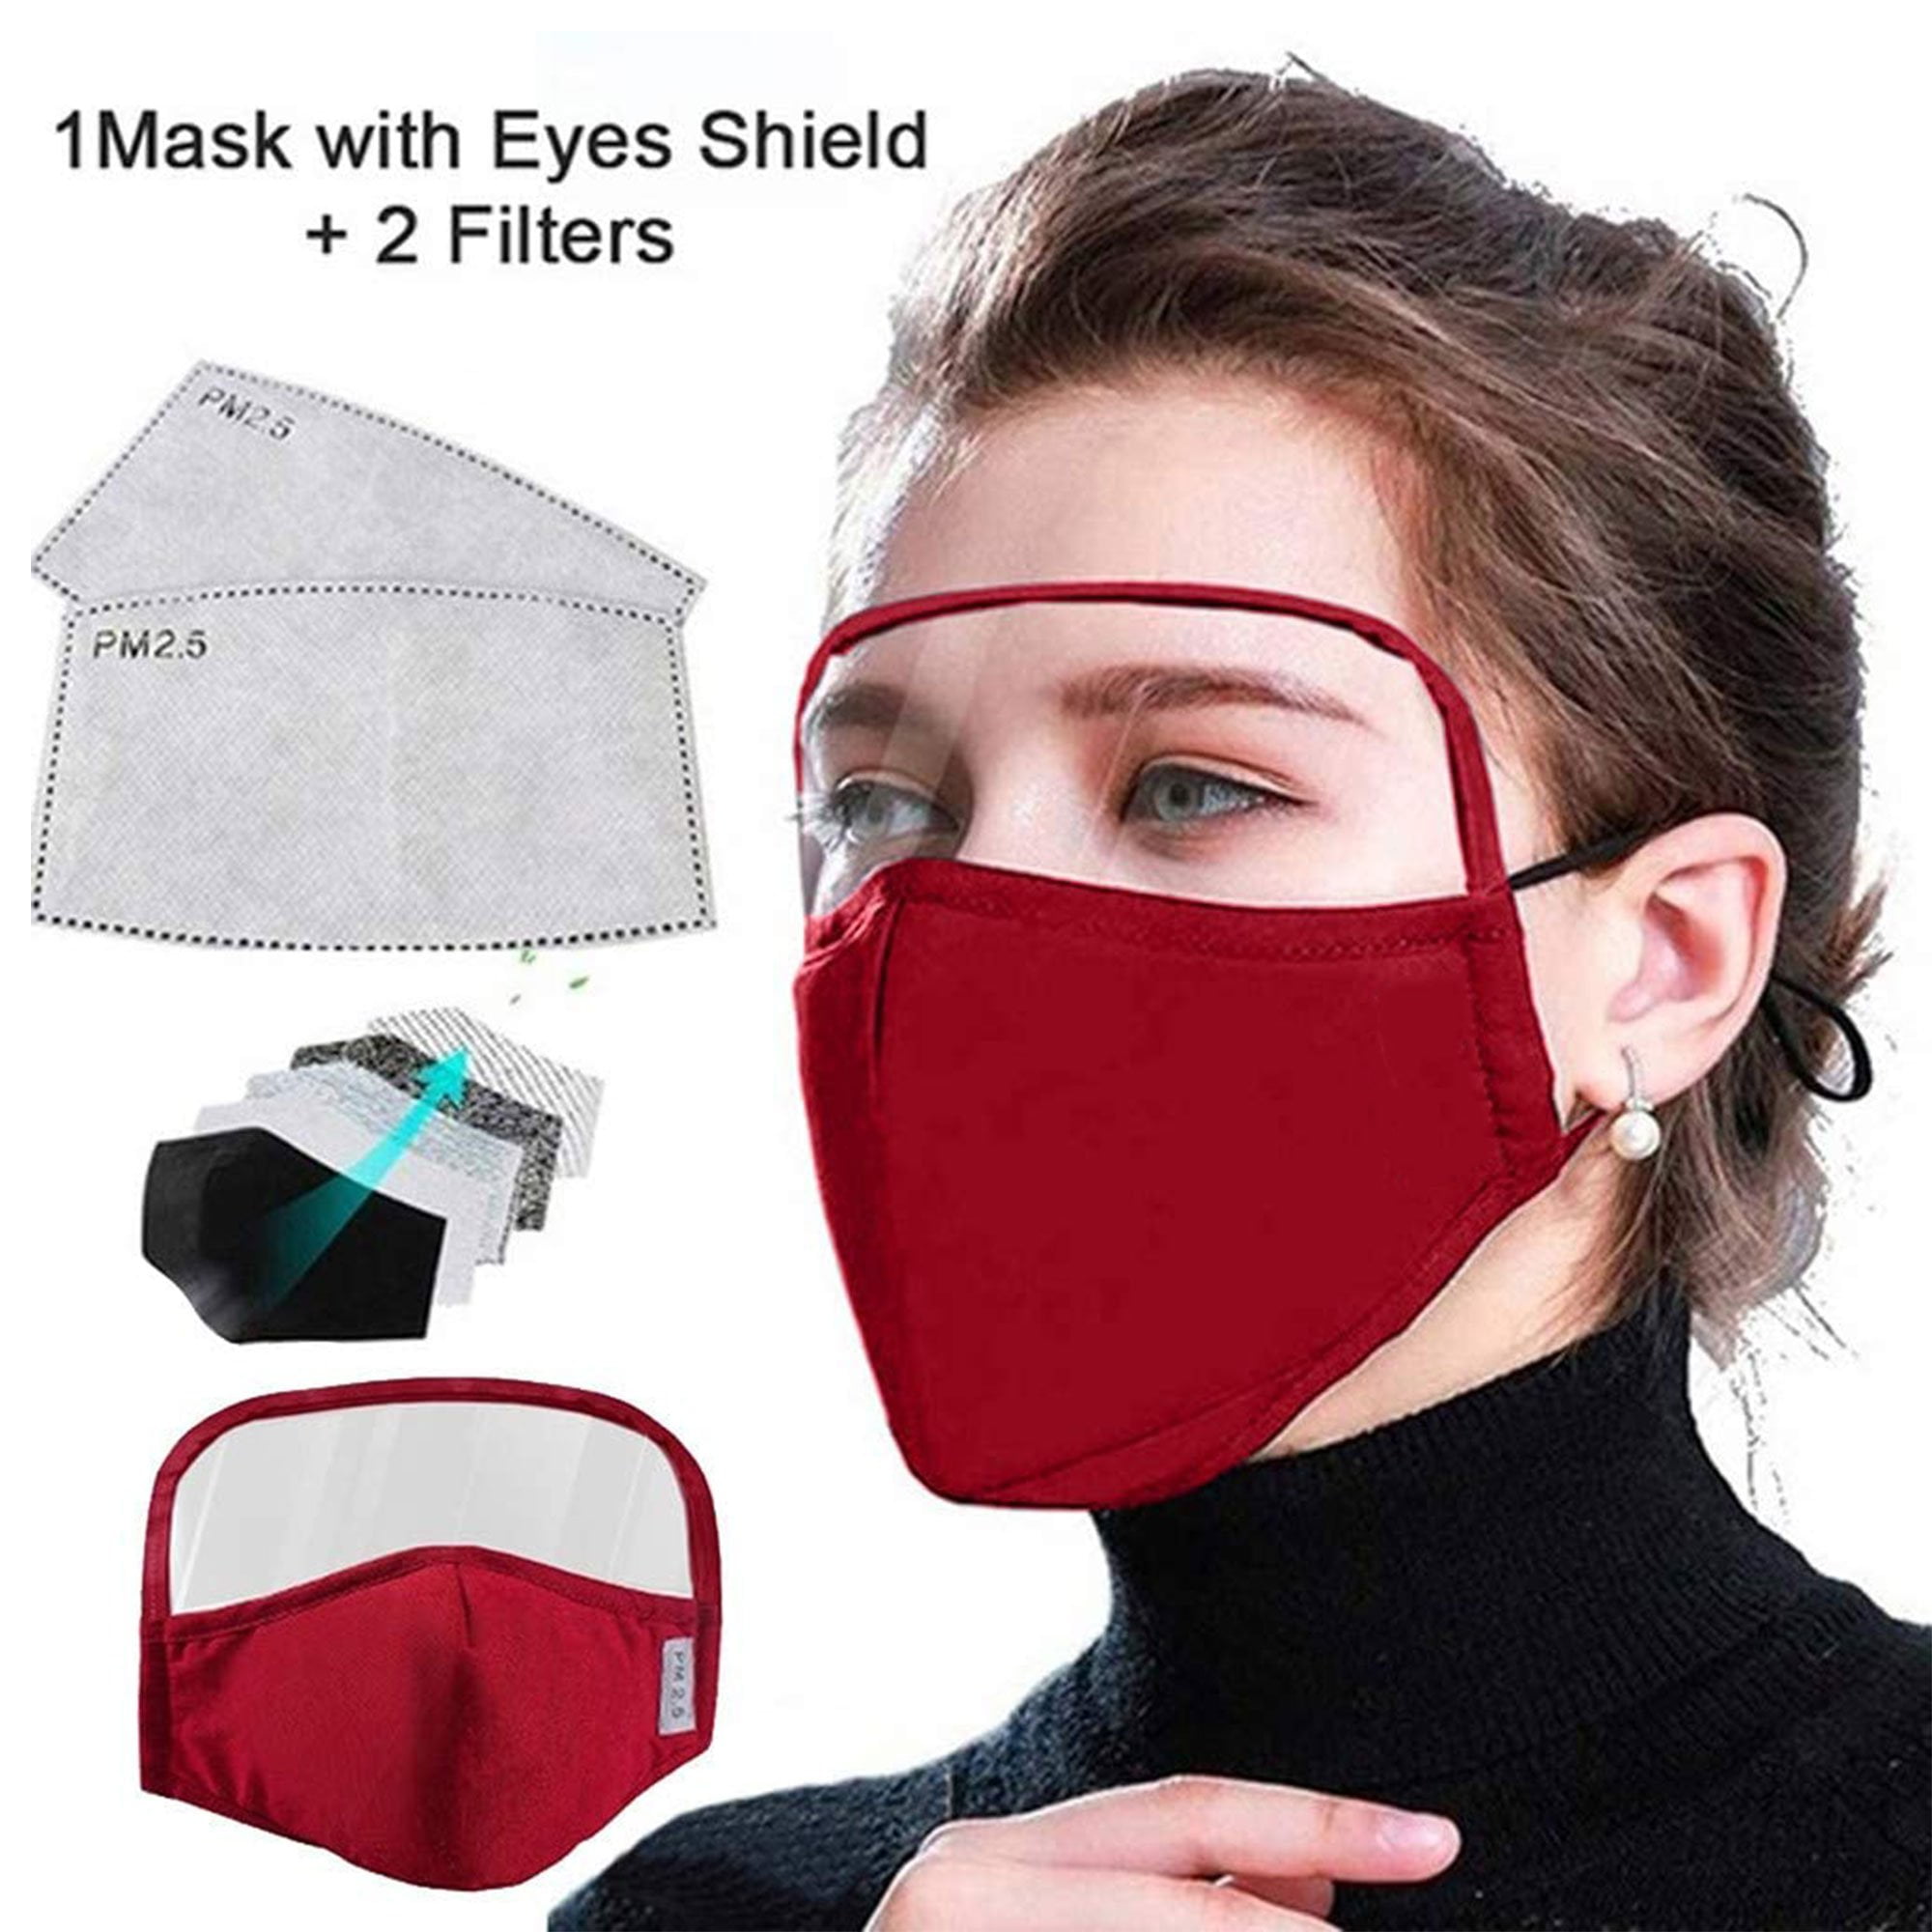 Details about   Reusable Cotton Face Mask w/ Eyes Shield & Air Breathing Valve & 2 PM2.5 Filters 